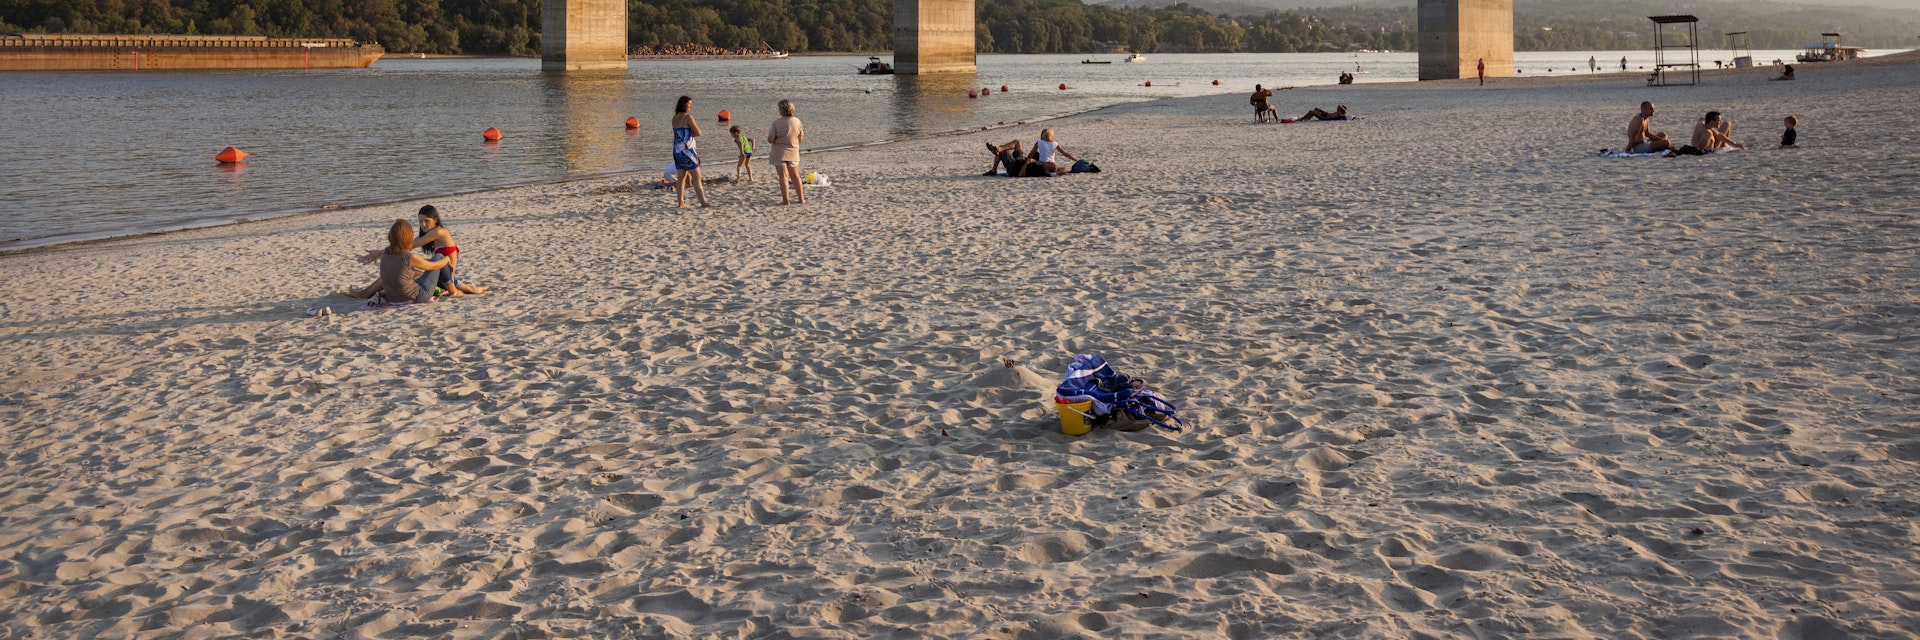 People on City Beach (Strand) on the Danube